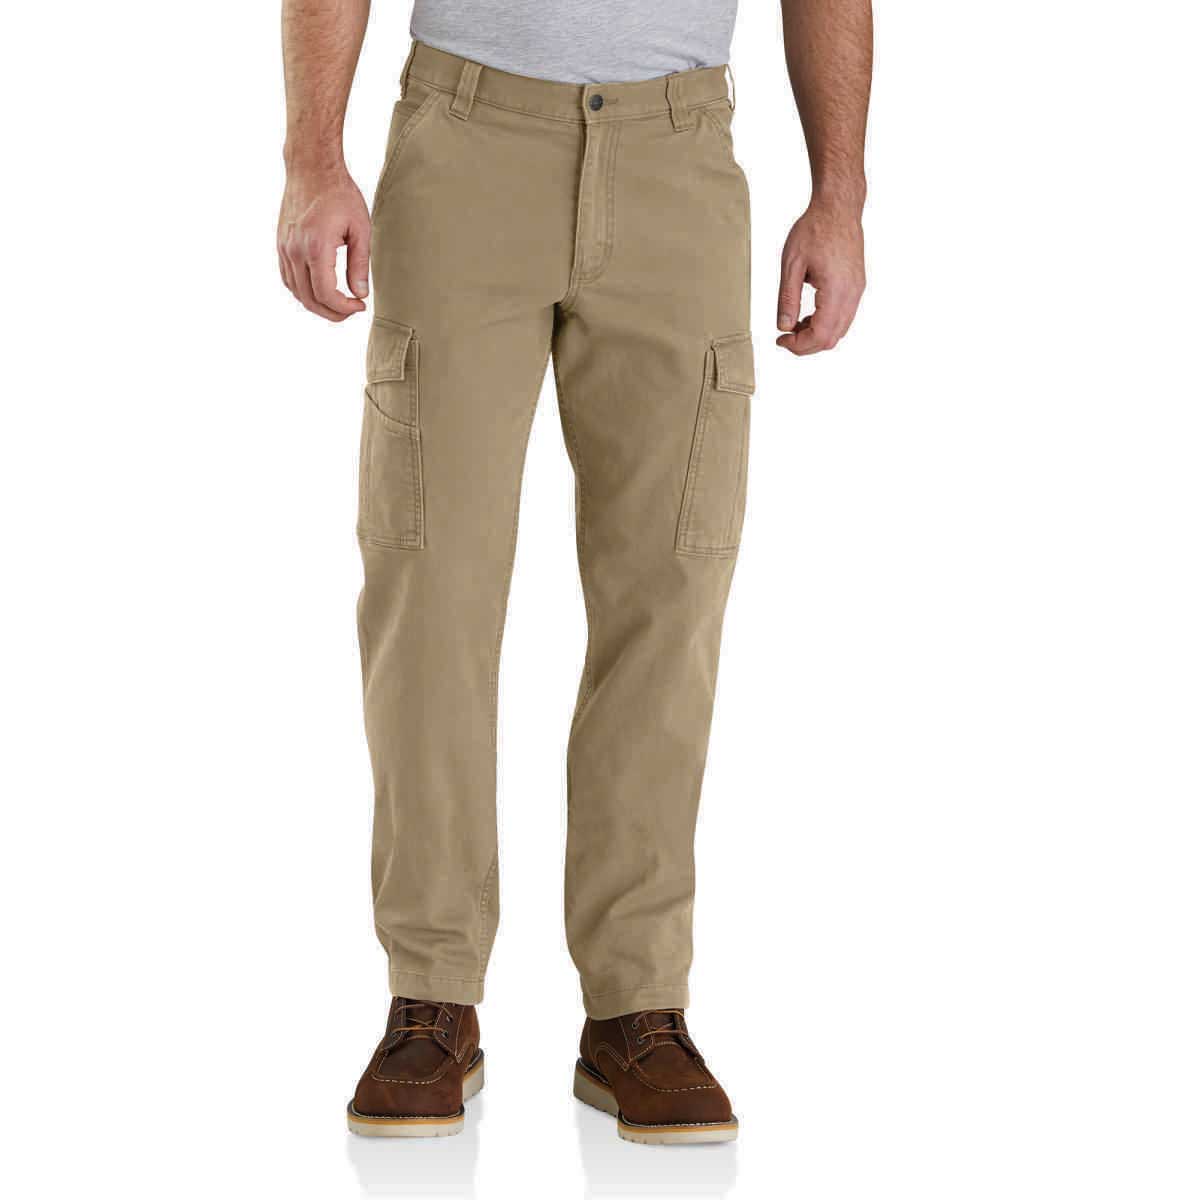 Men's Stretch Canvas Utility Work Pants - Slim Fit | Stockman Feed